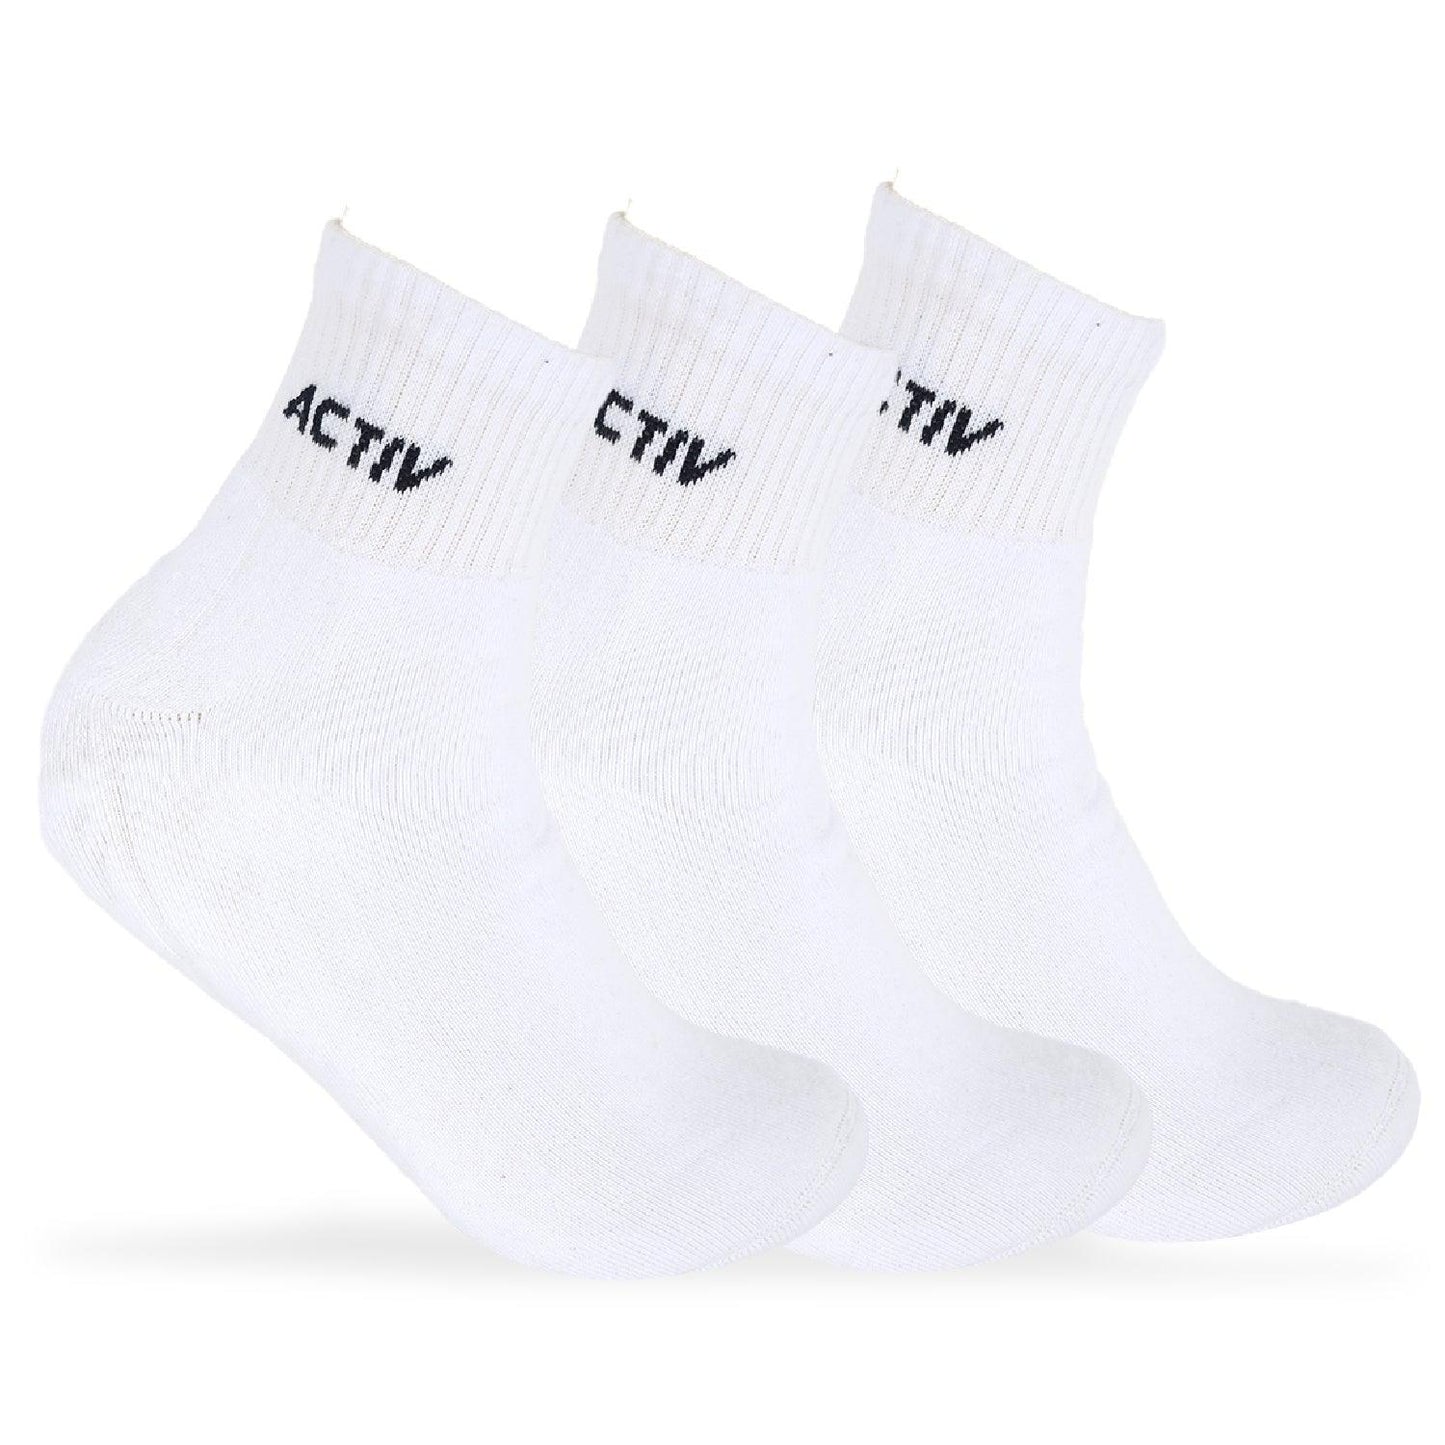 ACTIV MENS PACKAGE SOCKS - WHITE - Activ Abou Alaa